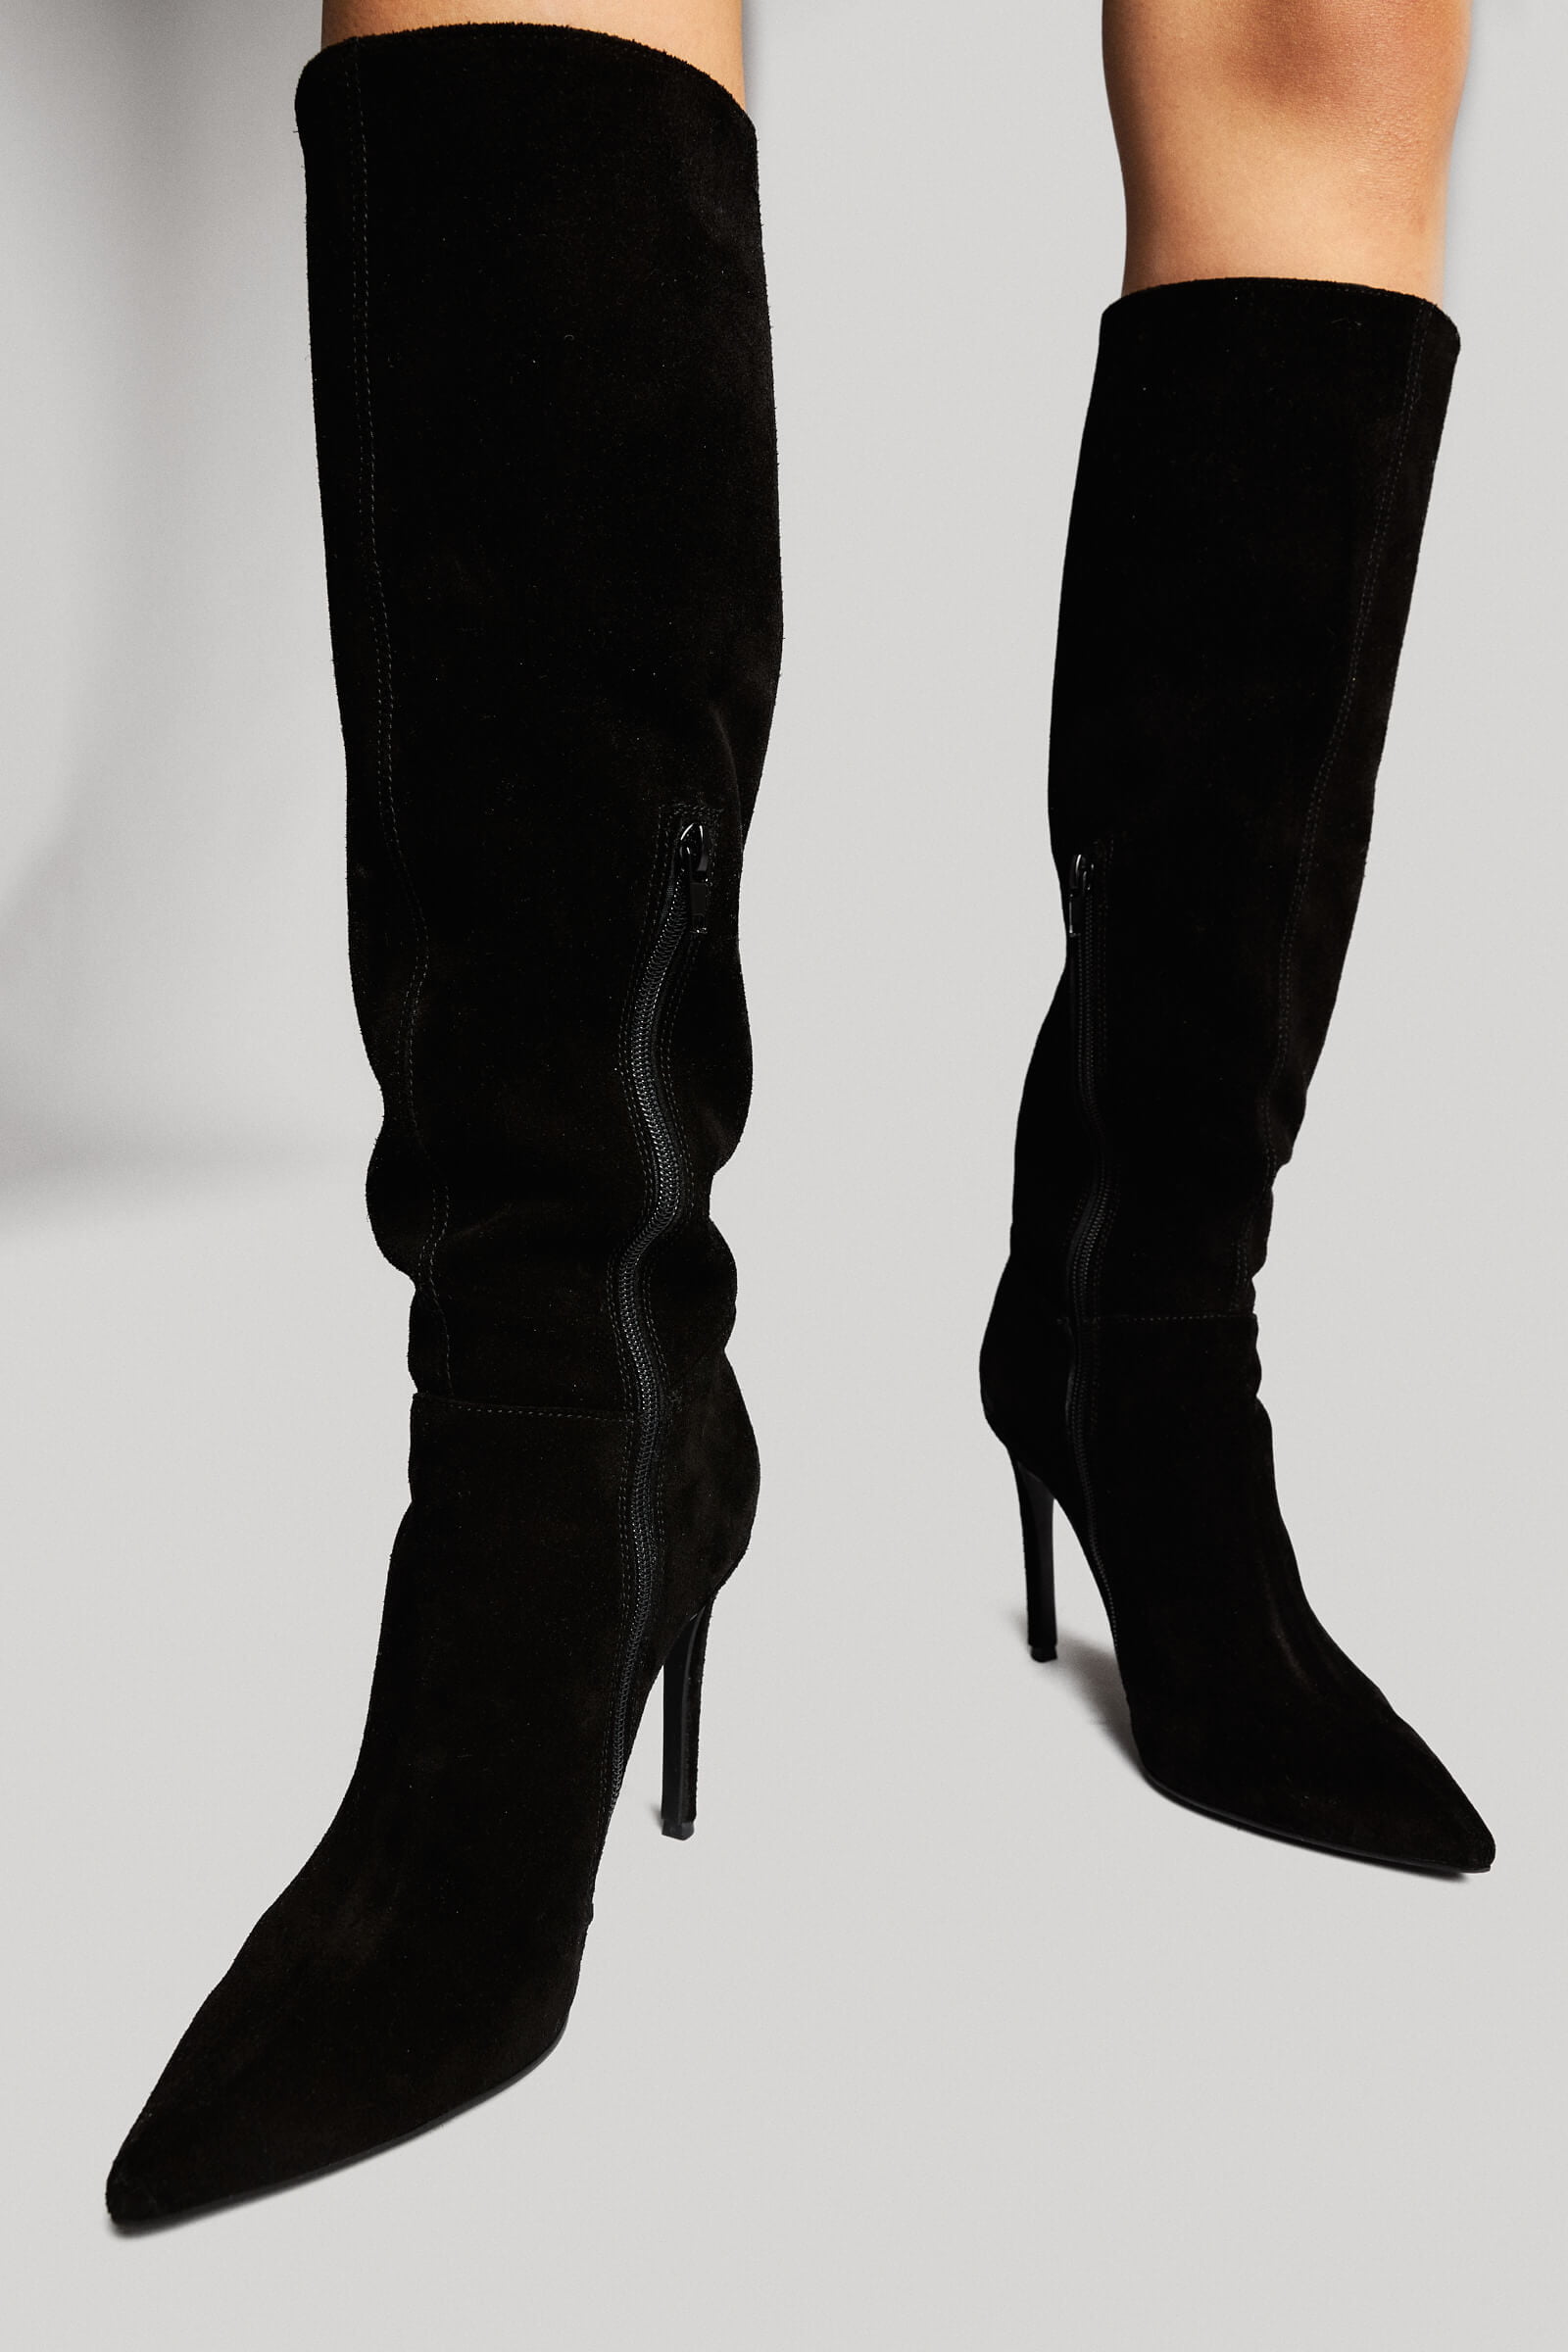 WOW! Yes, that is the word we were looking for to describe our “Splendor” Suede Stiletto Boots that sit atop high-heels in such a fashionable manner. Every step you take in these marvels, will be followed through by a shower of compliments. We’re definitely waiting for your feedback.